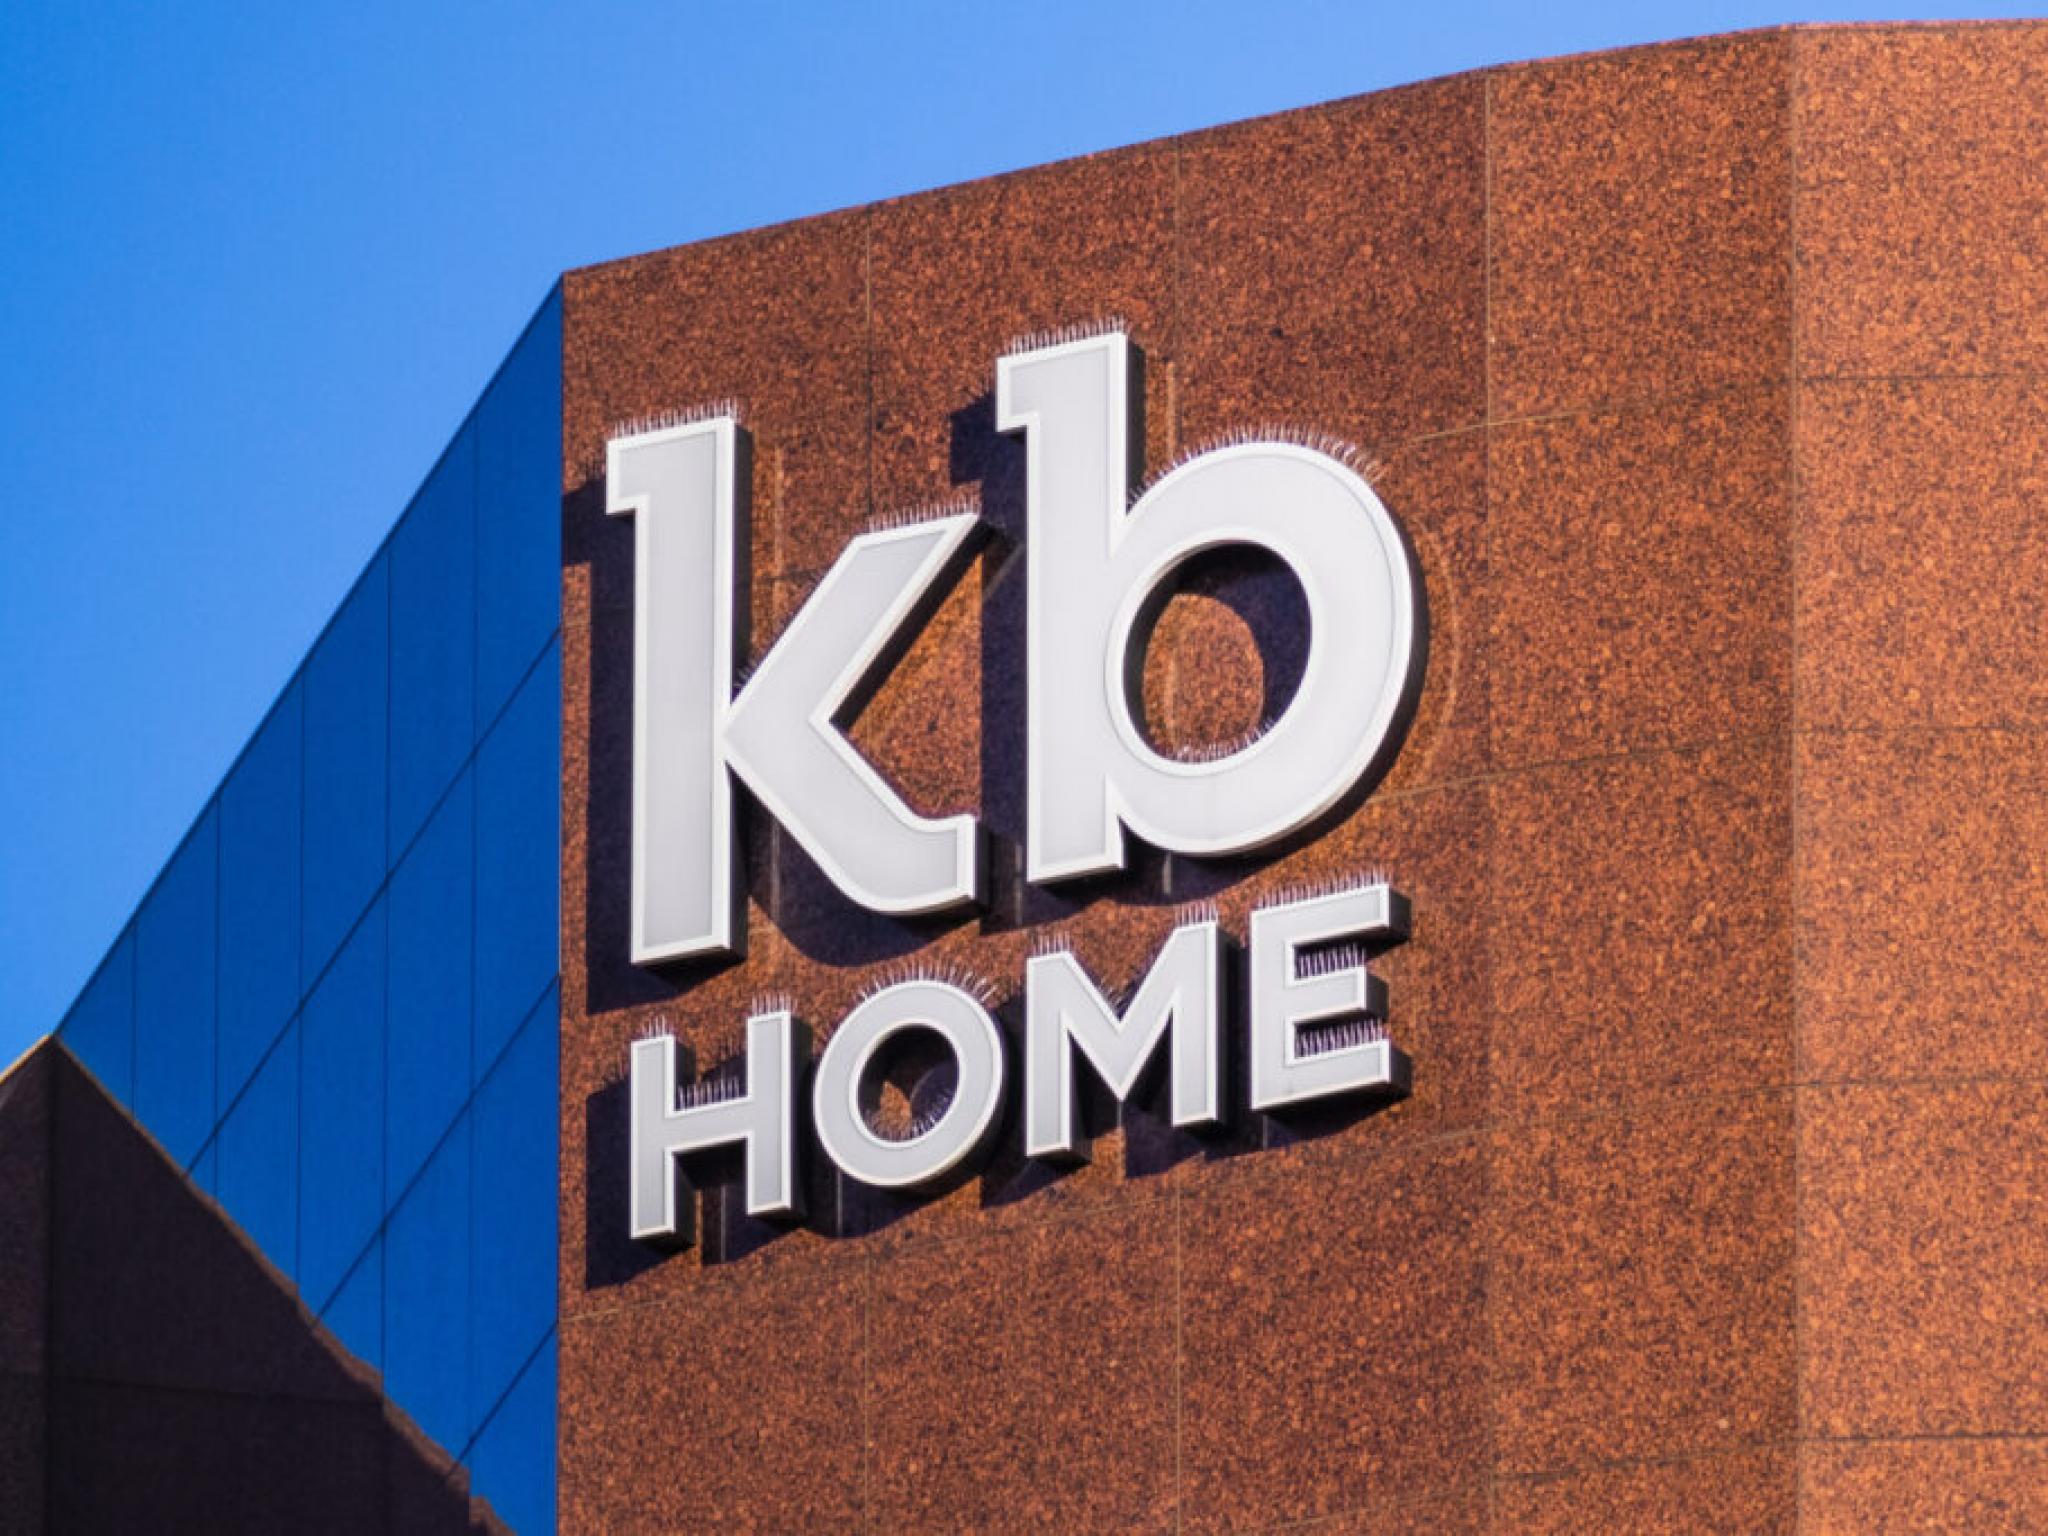  kb-home-analysts-boost-their-forecasts-after-upbeat-q2-results 